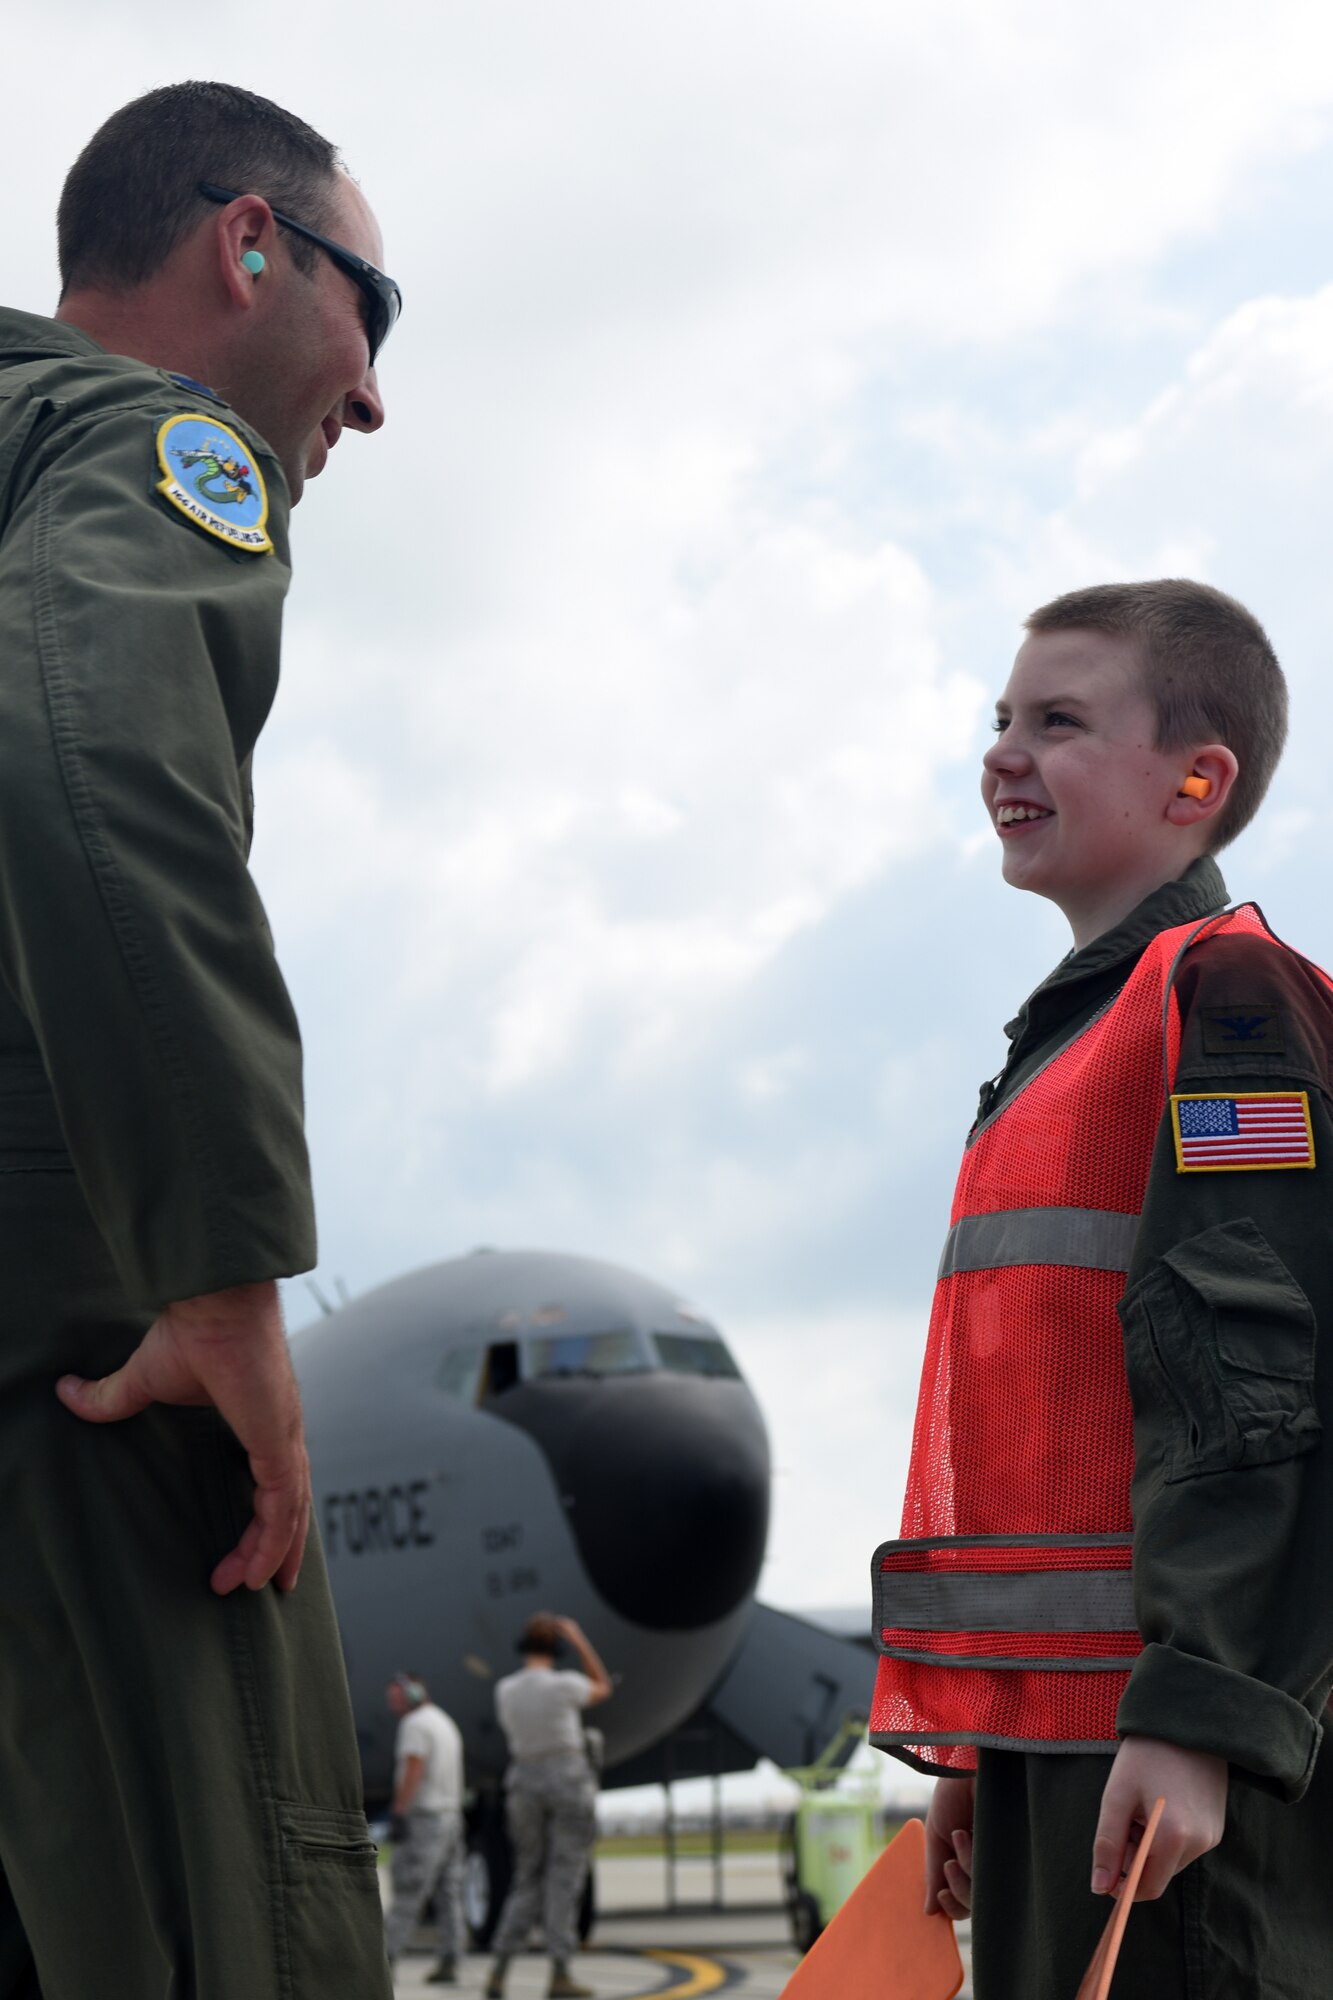 U.S. Air Force Capt. Jacob Allen, a pilot with the 121st Air Refueling Wing, talks with Pilot for a Day, Jake Sprowl, a 12-year-old from Springfield, Ohio, Aug. 11, 2015 at Rickenbacker Air National Guard Base. Sprowl and his family spent the day with Airmen of the 121st Air Refueling Wing, touring the base and learning about the missions of the various squadrons. (U.S. Air National Guard photo by Airman Ashley Williams/Released)